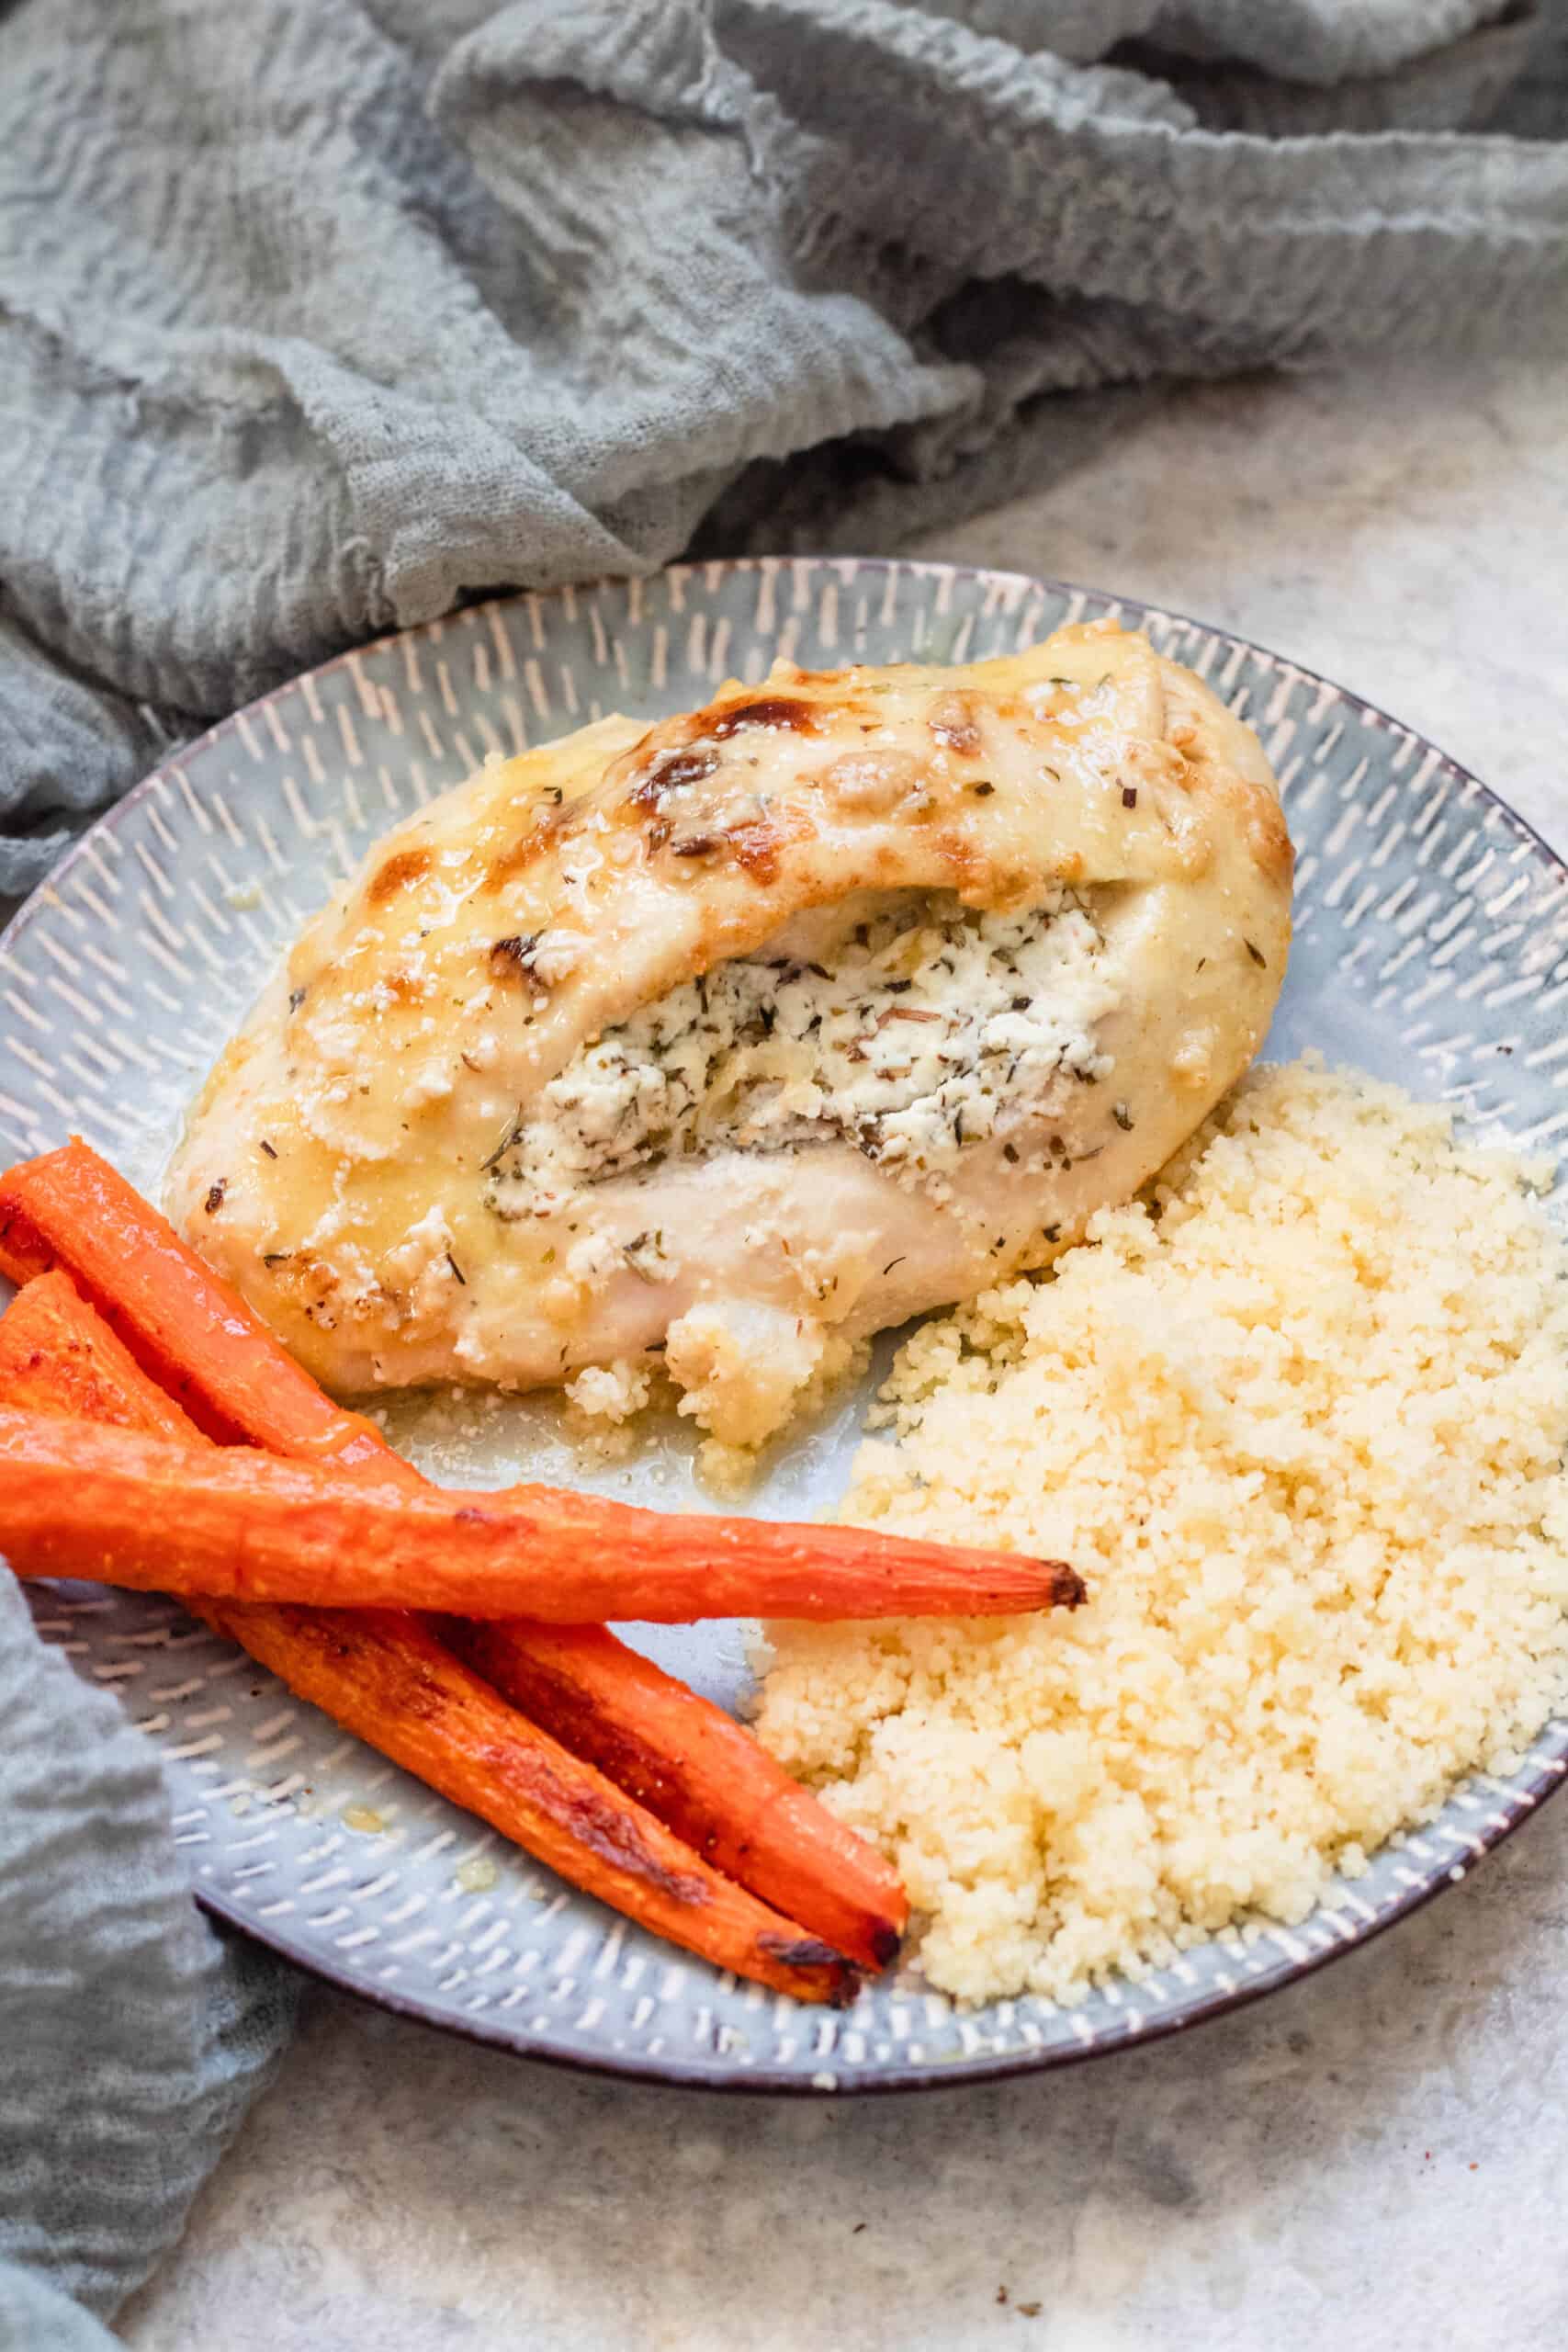 Stuffed chicken breast with couscous and roasted carrots on the side.